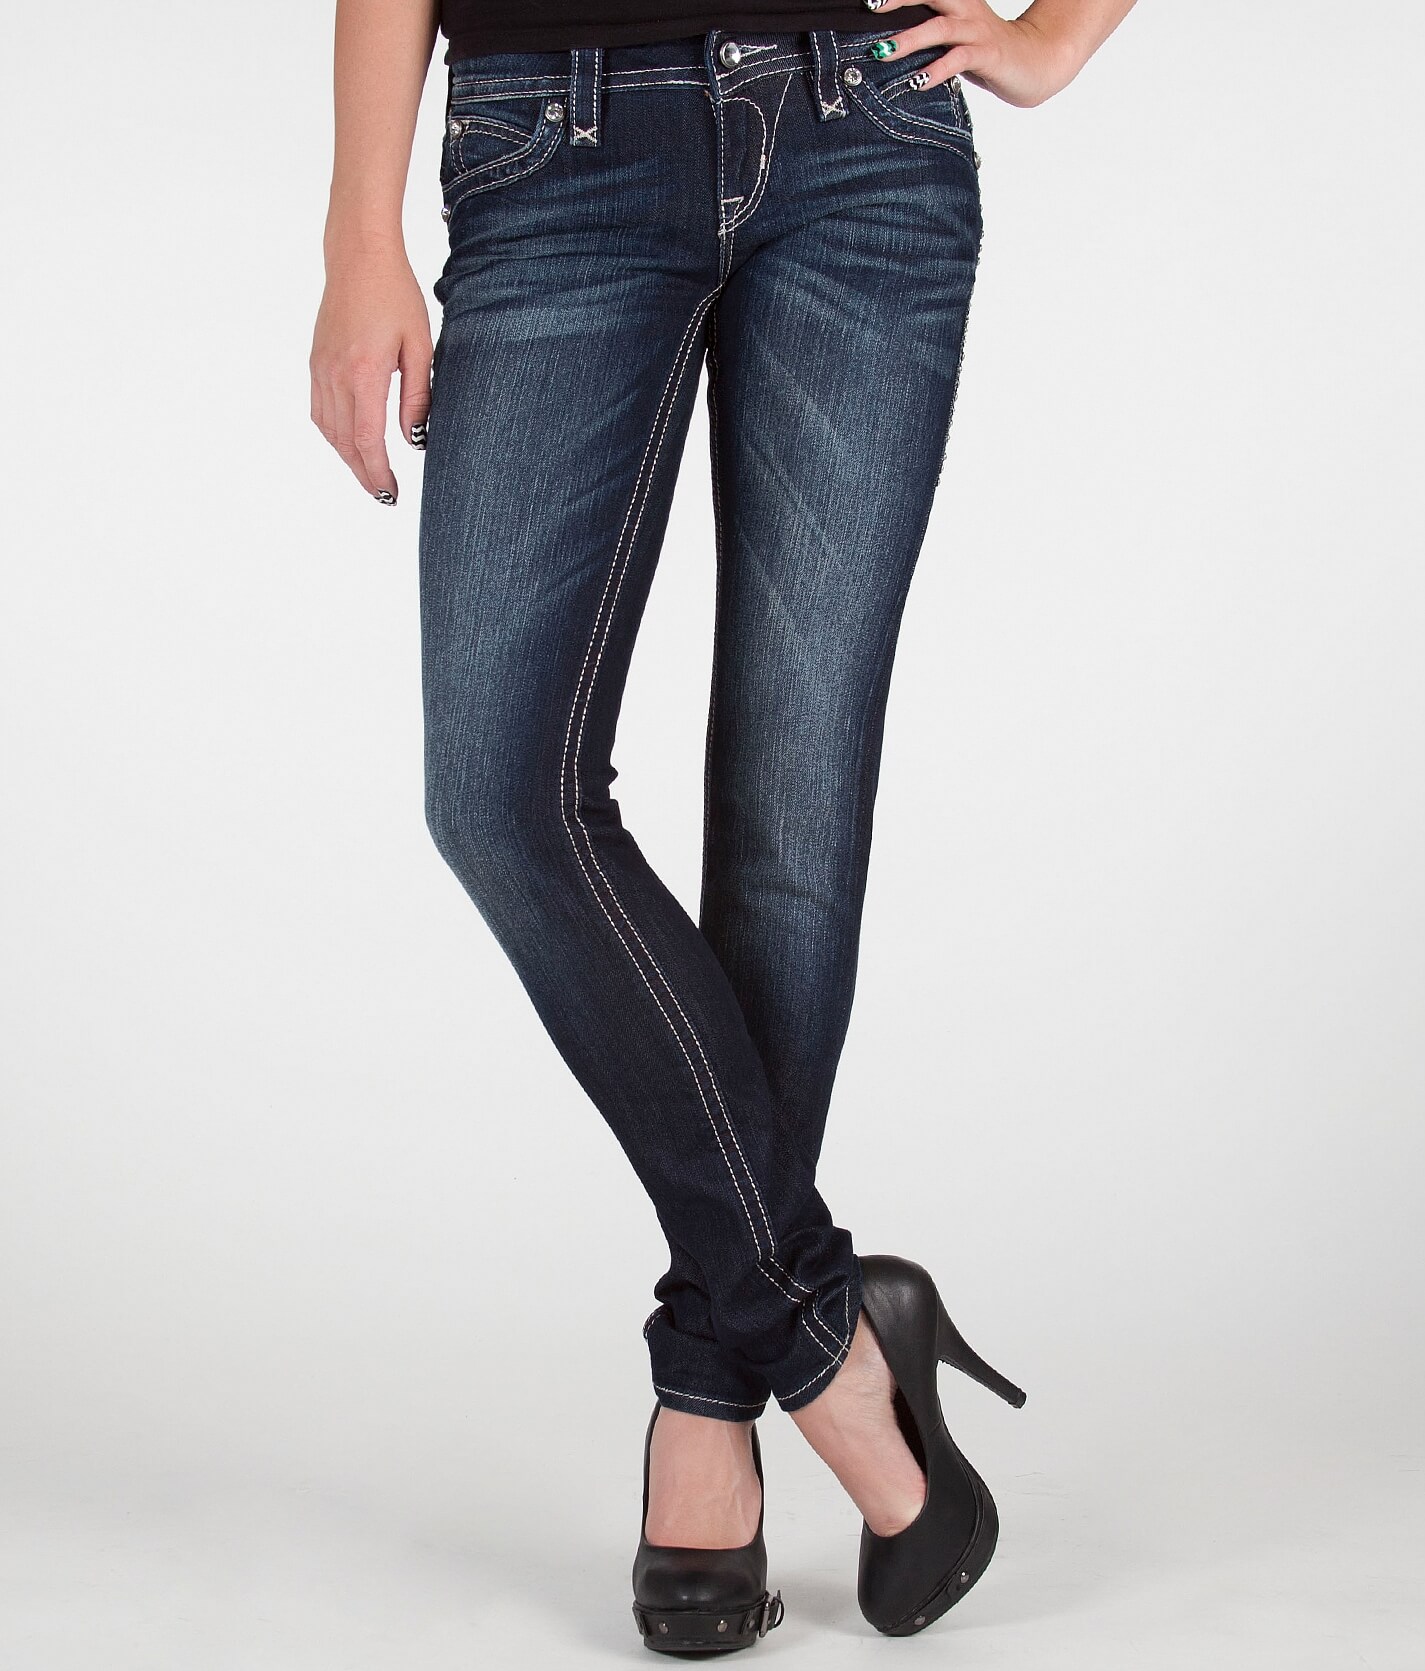 black cropped jeans womens